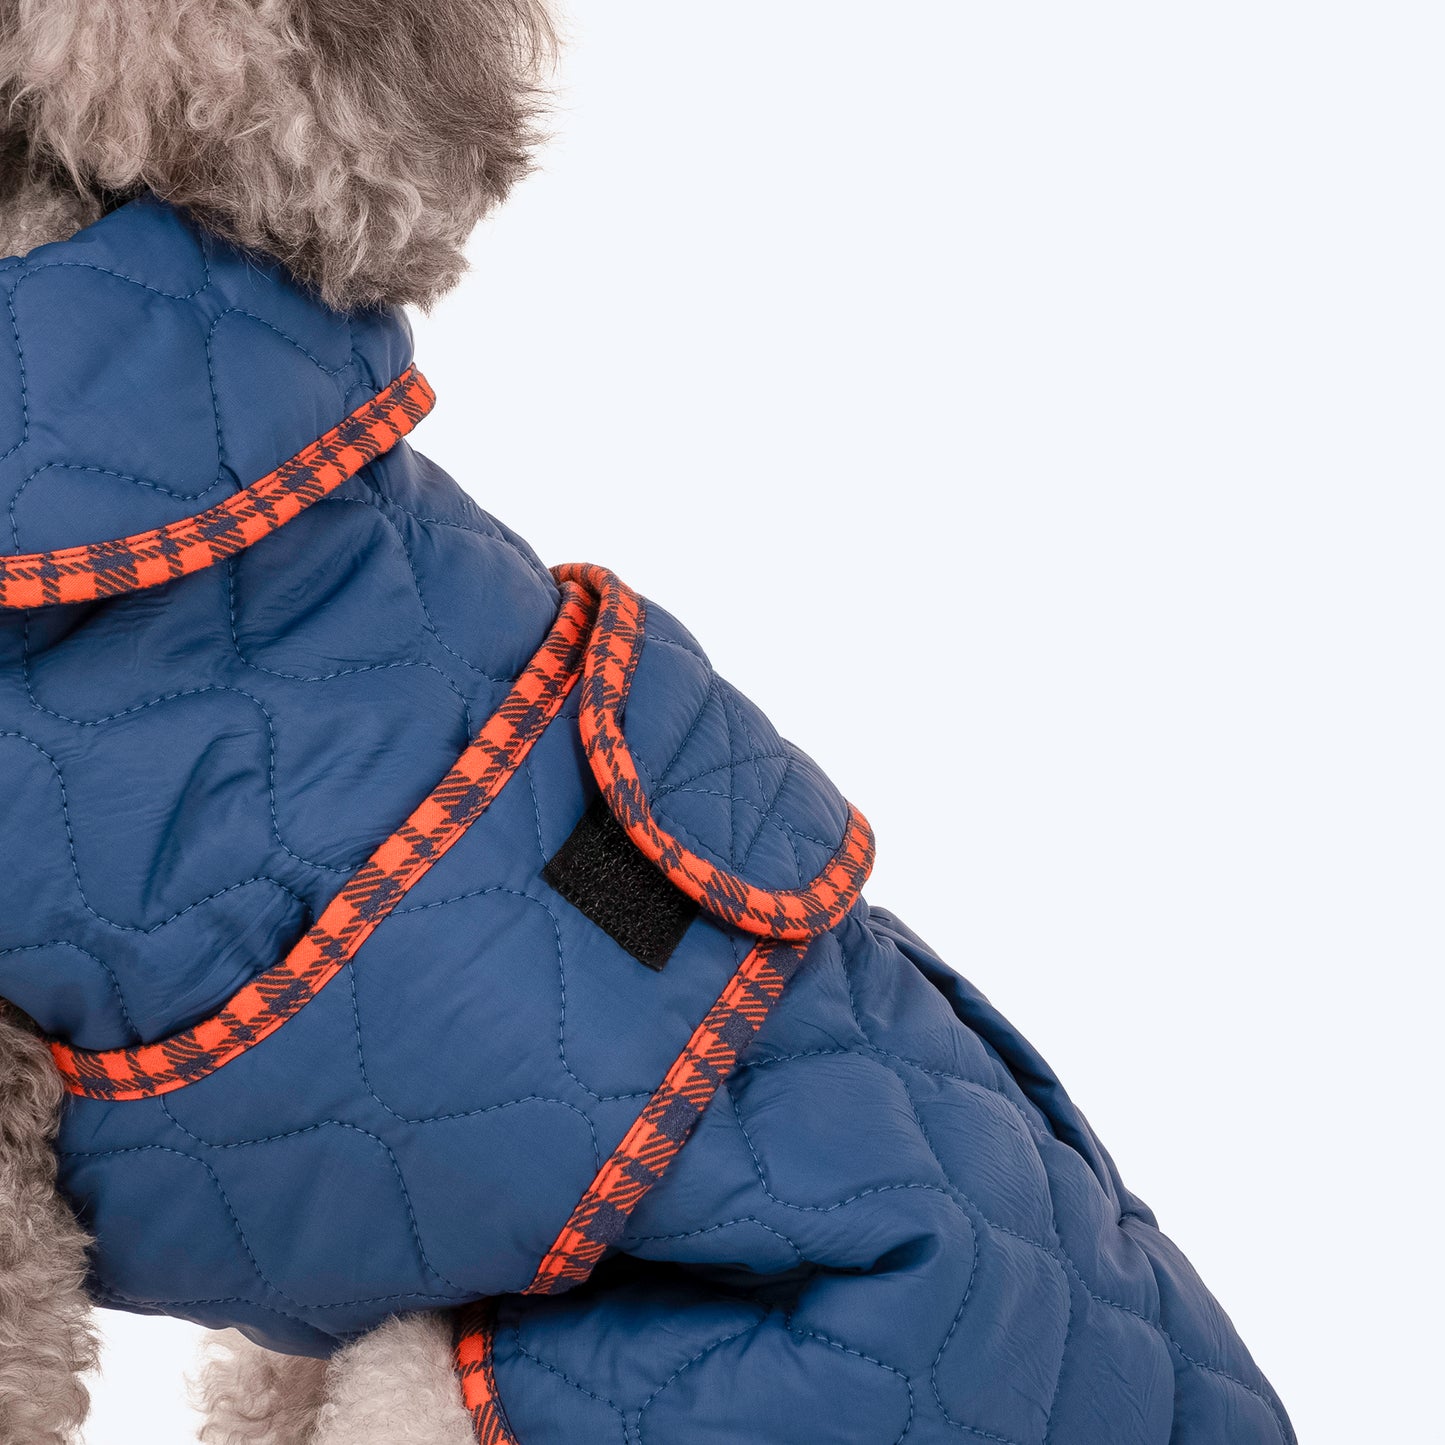 HUFT Grrberry Quilted Dog Jacket - Teal Blue - Heads Up For Tails